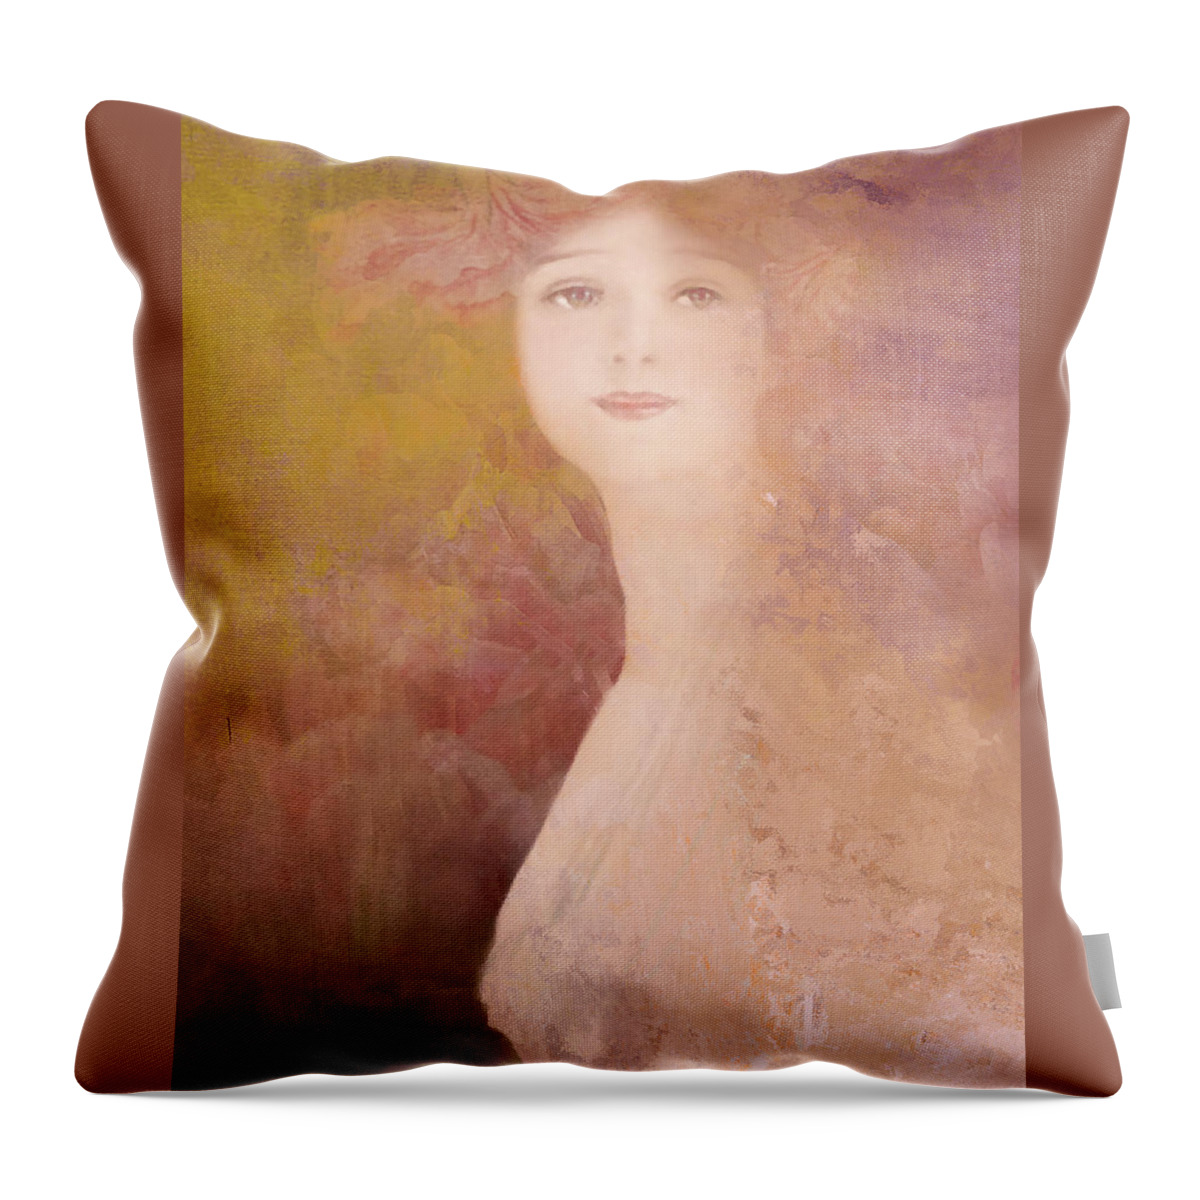 Woman Throw Pillow featuring the digital art Love calls by Jeff Burgess